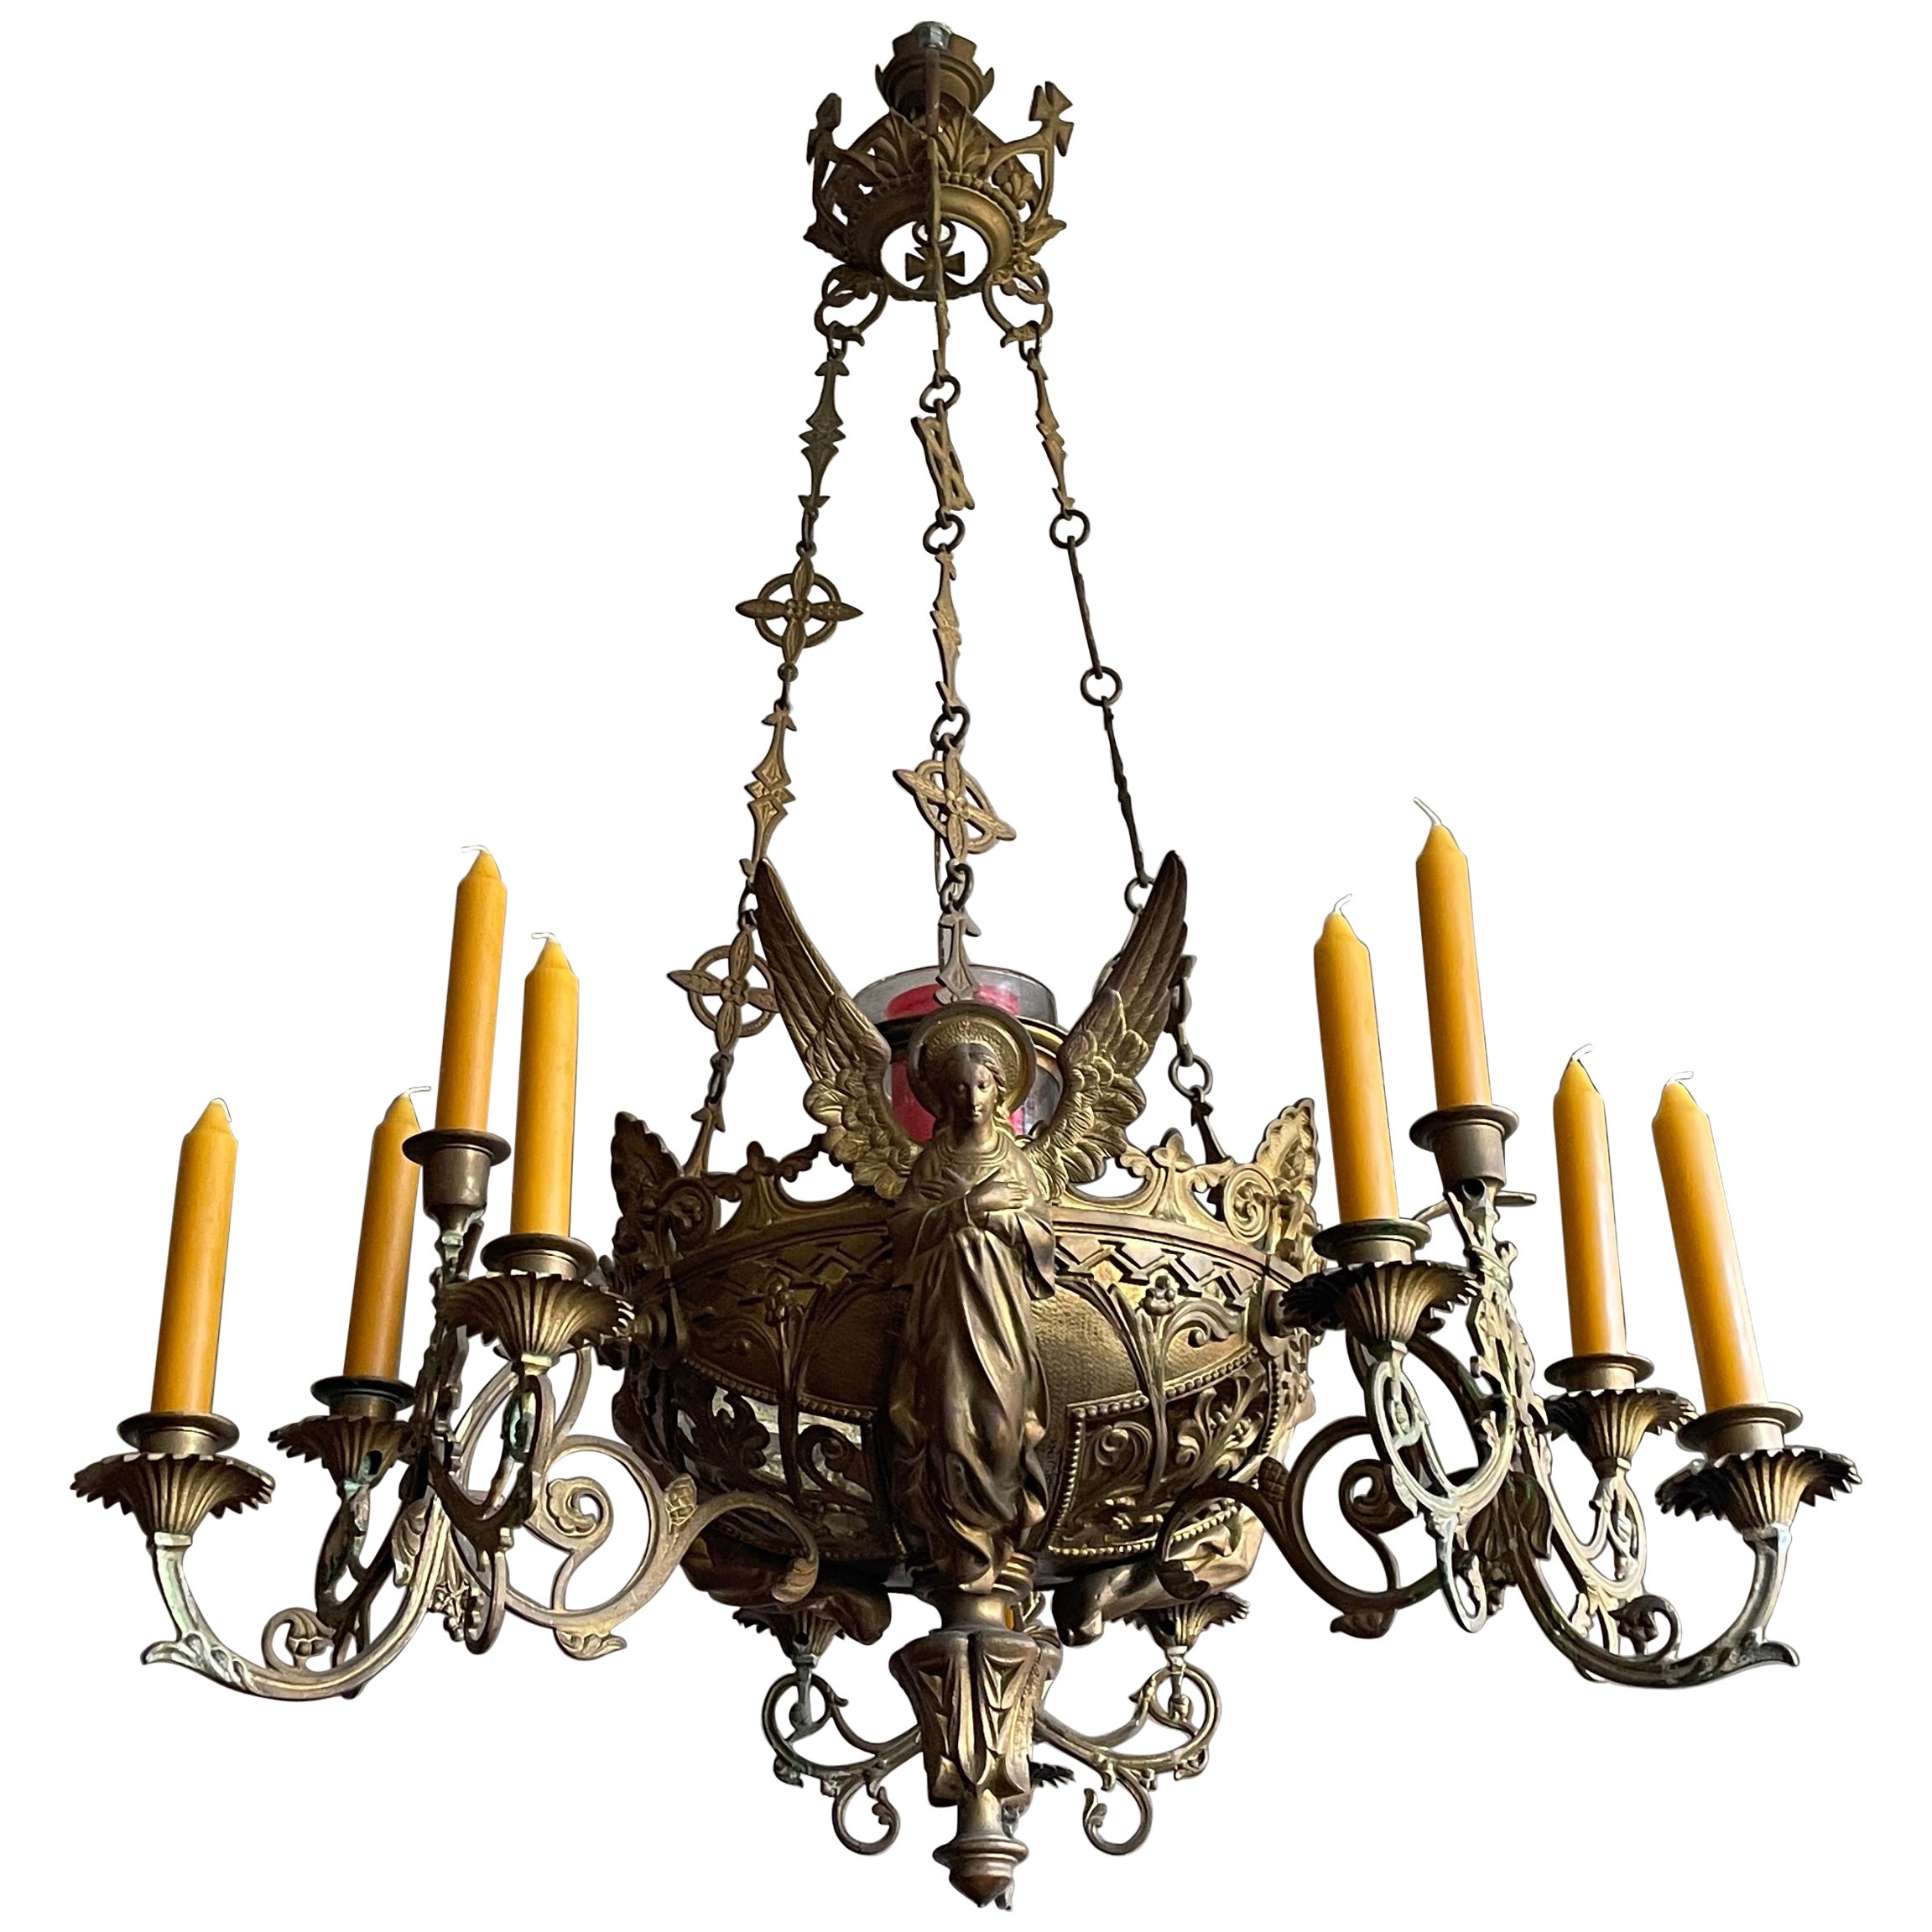 Bronze Gothic Revival Candle Chandelier w. Virgin Mary & Marian Cross Sculptures For Sale